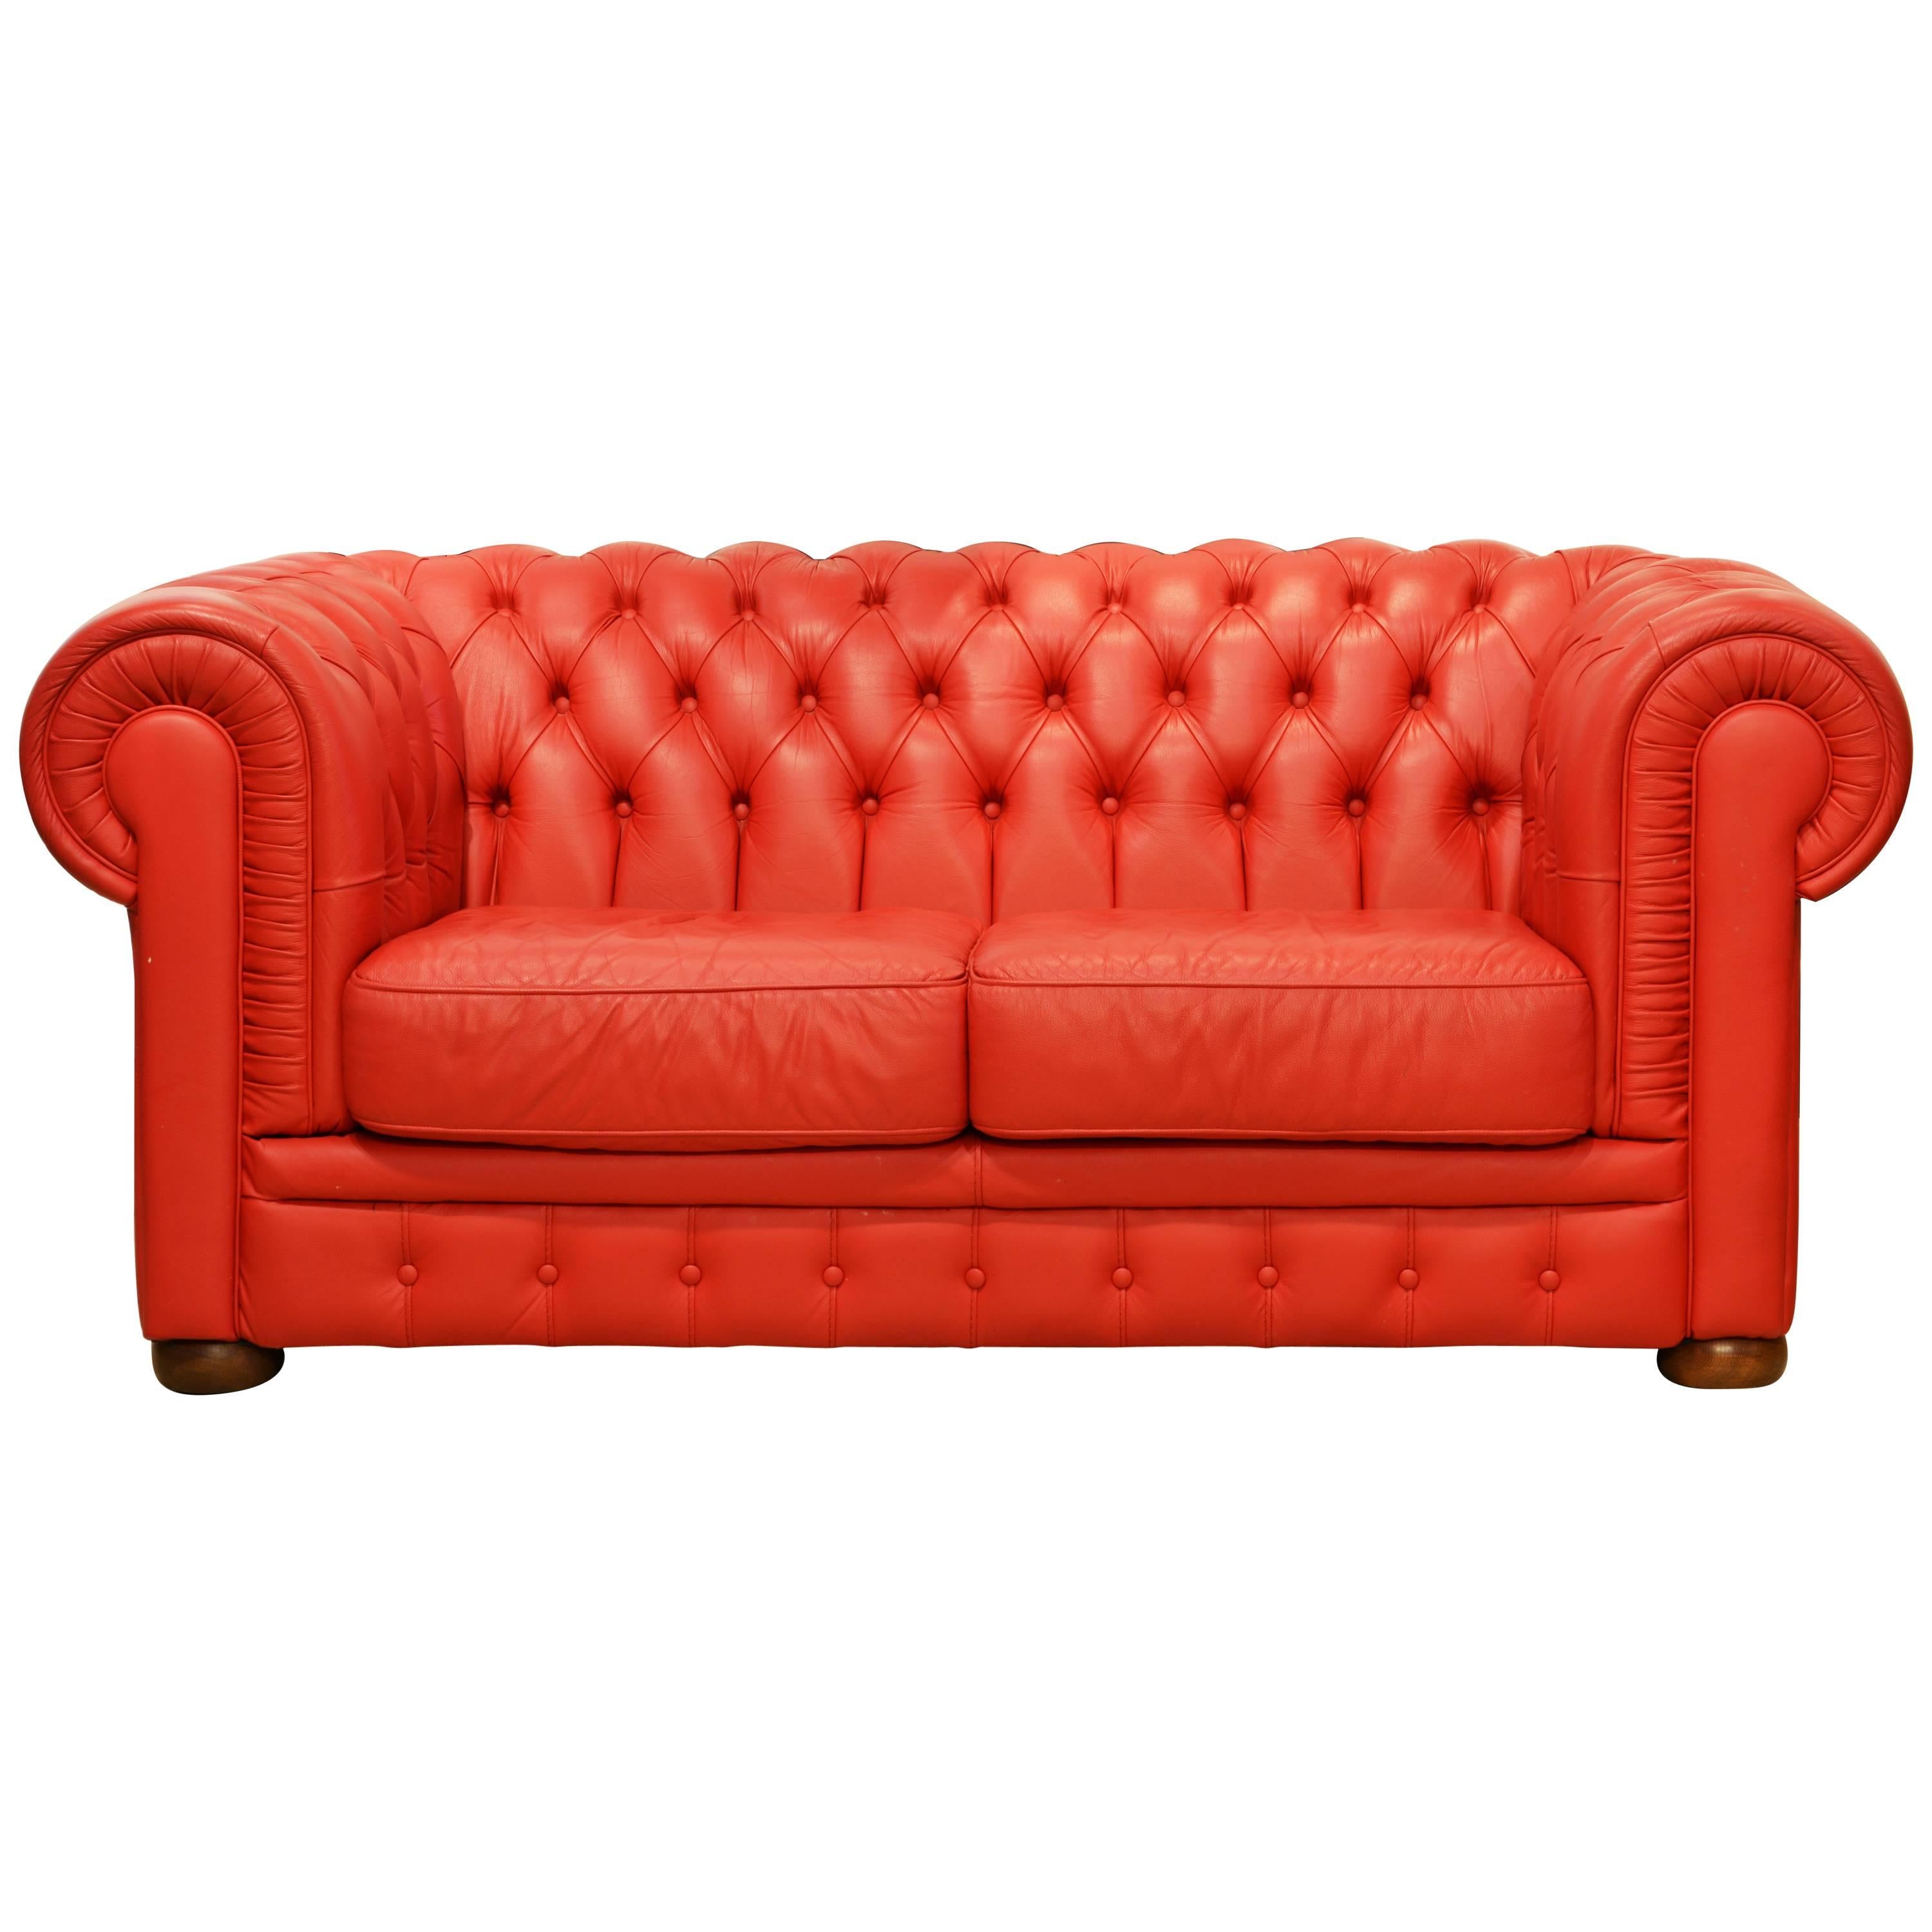 Wonderful Italian Red Leather Chesterfield Sofa in the Style of Poltrona  Frau at 1stDibs